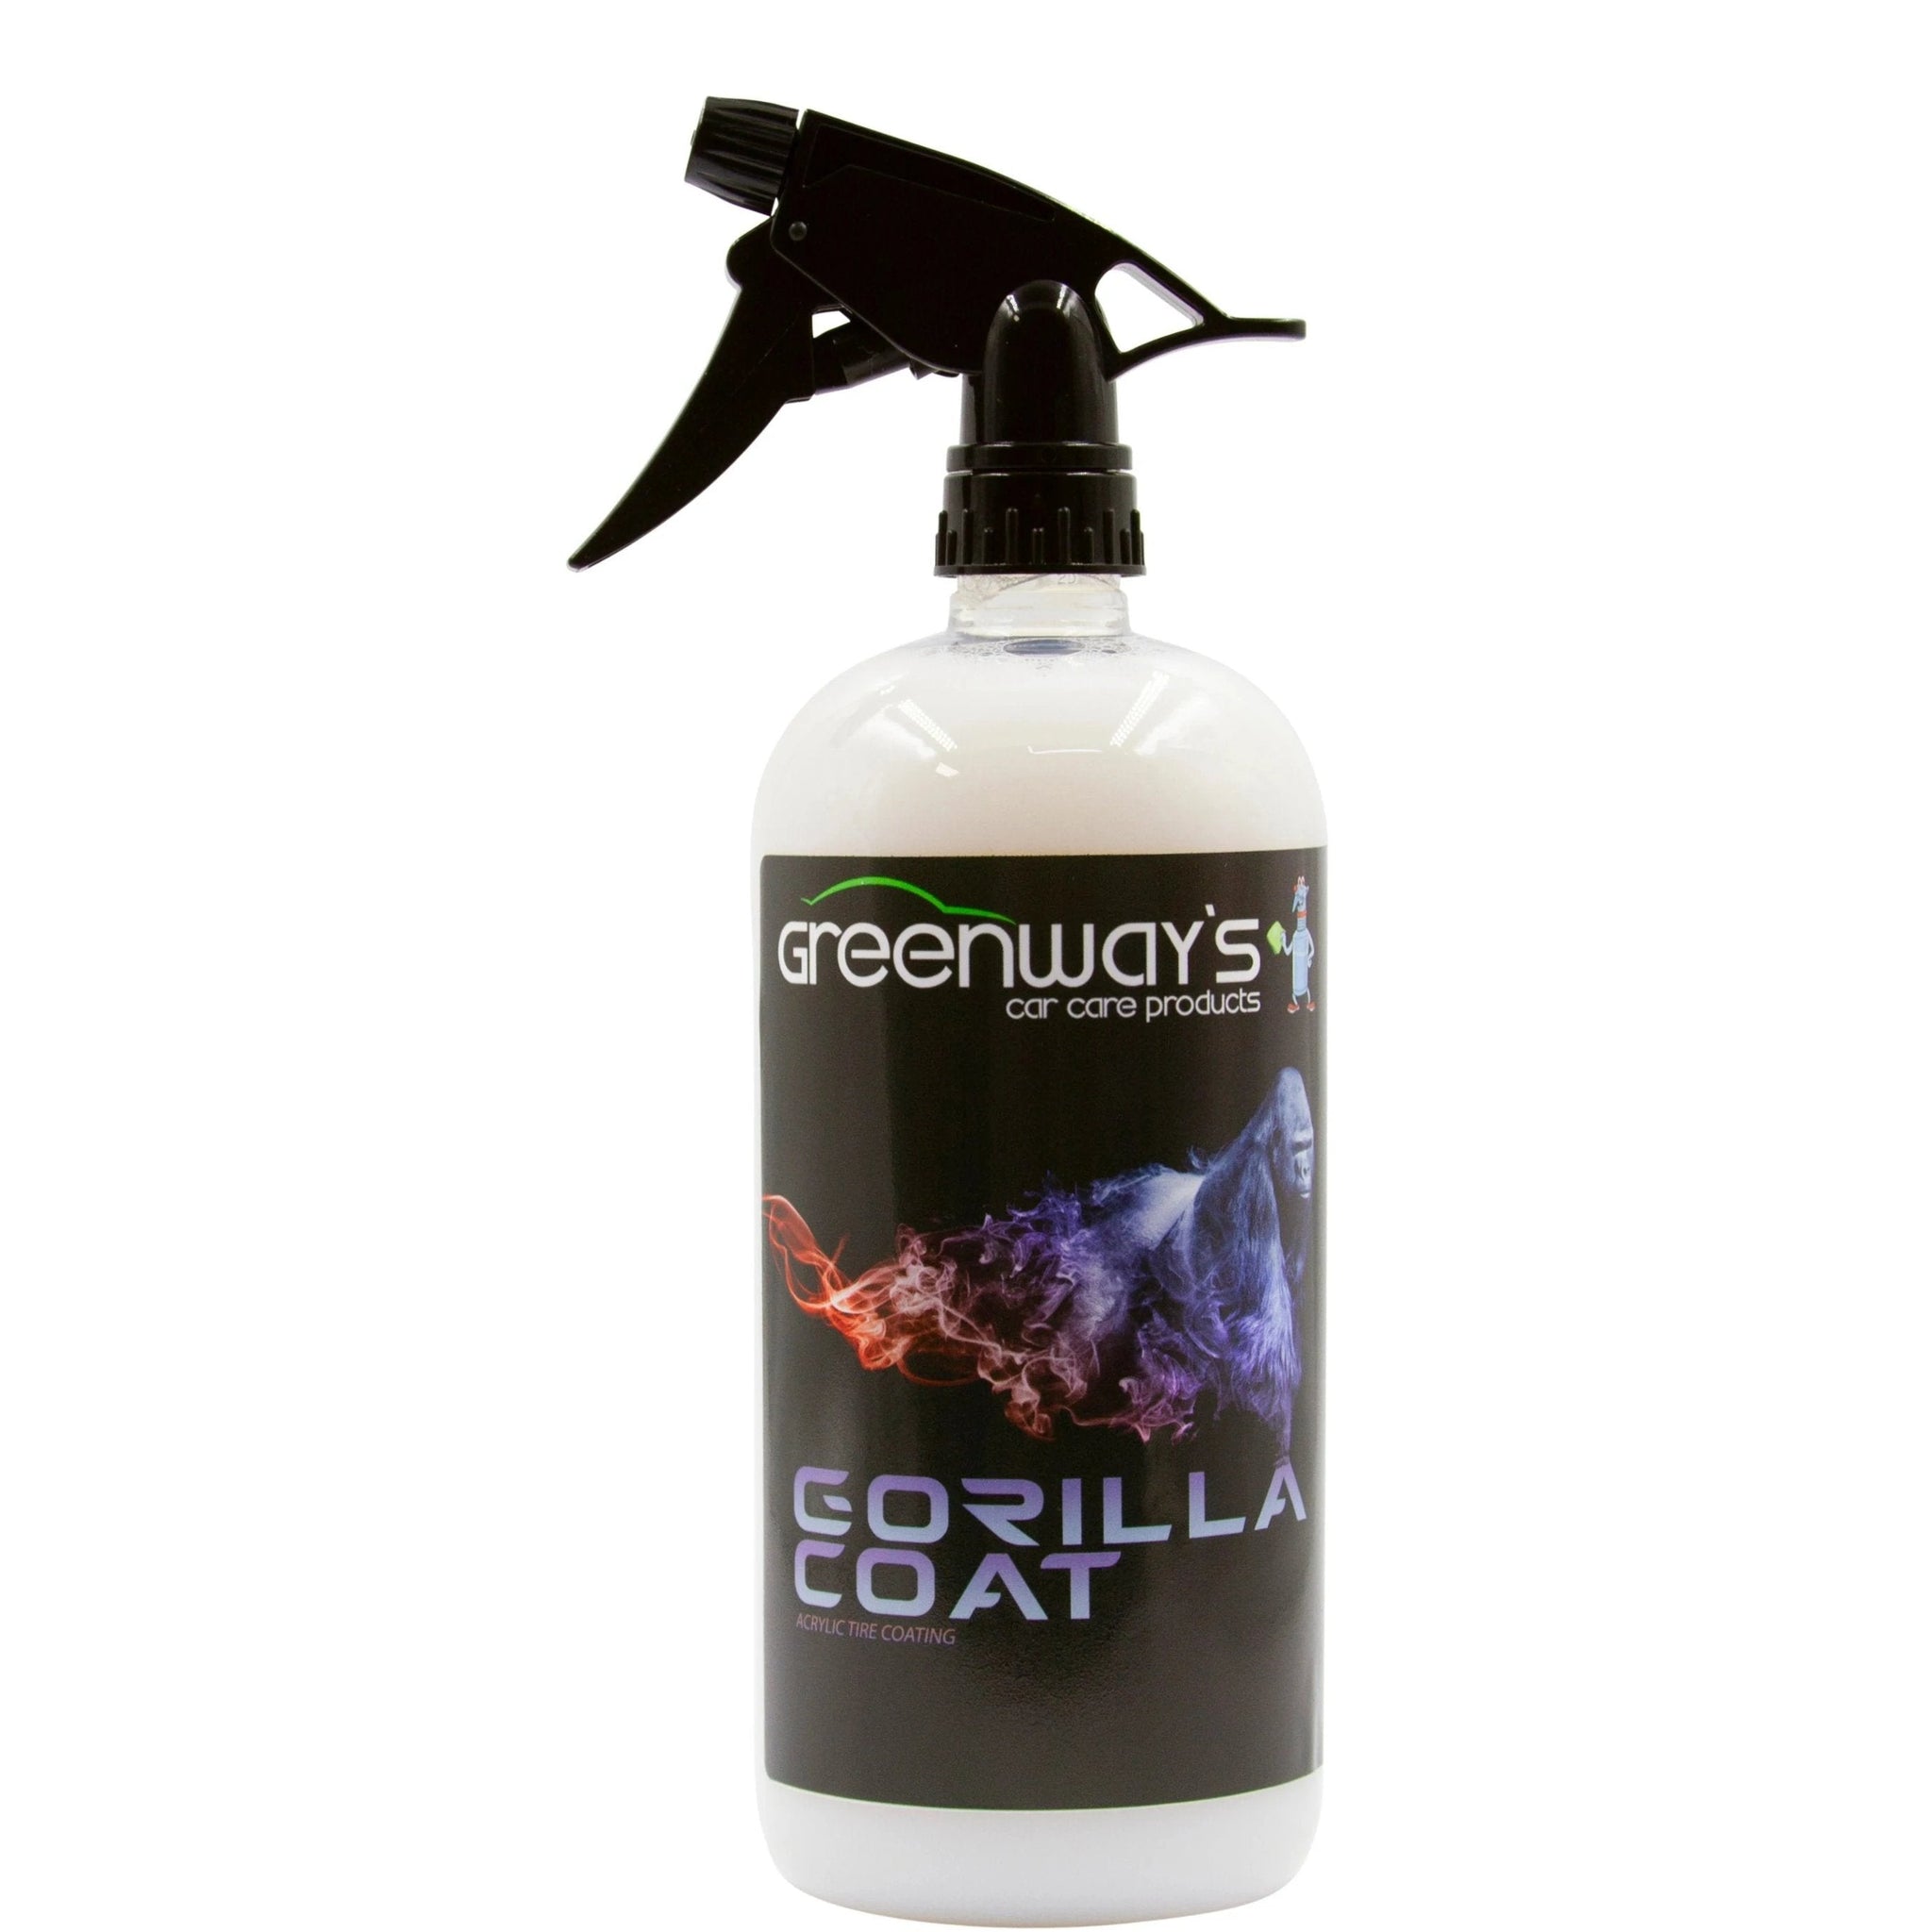 Greenway’s Car Care Products Gorilla Coat, semi-permanent, hydrophobic, satin or high gloss acrylic tire shine coating, 32 ounces.